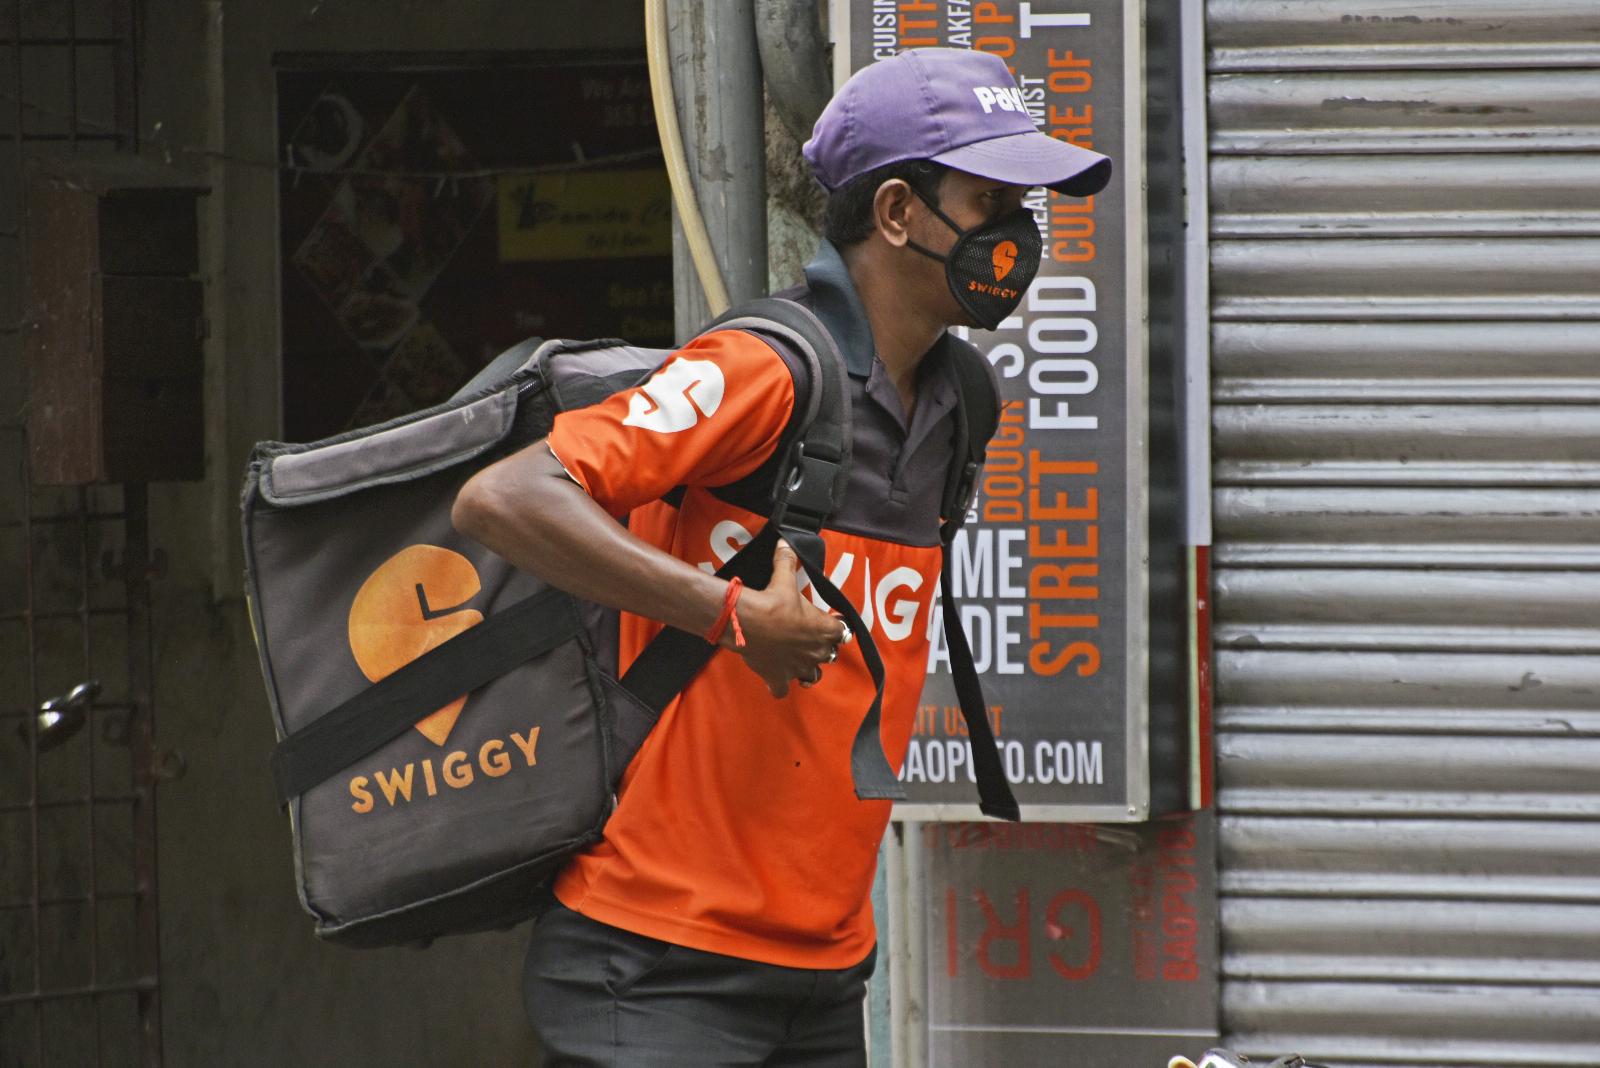 Swiggy’s food delivery business reaches profitability